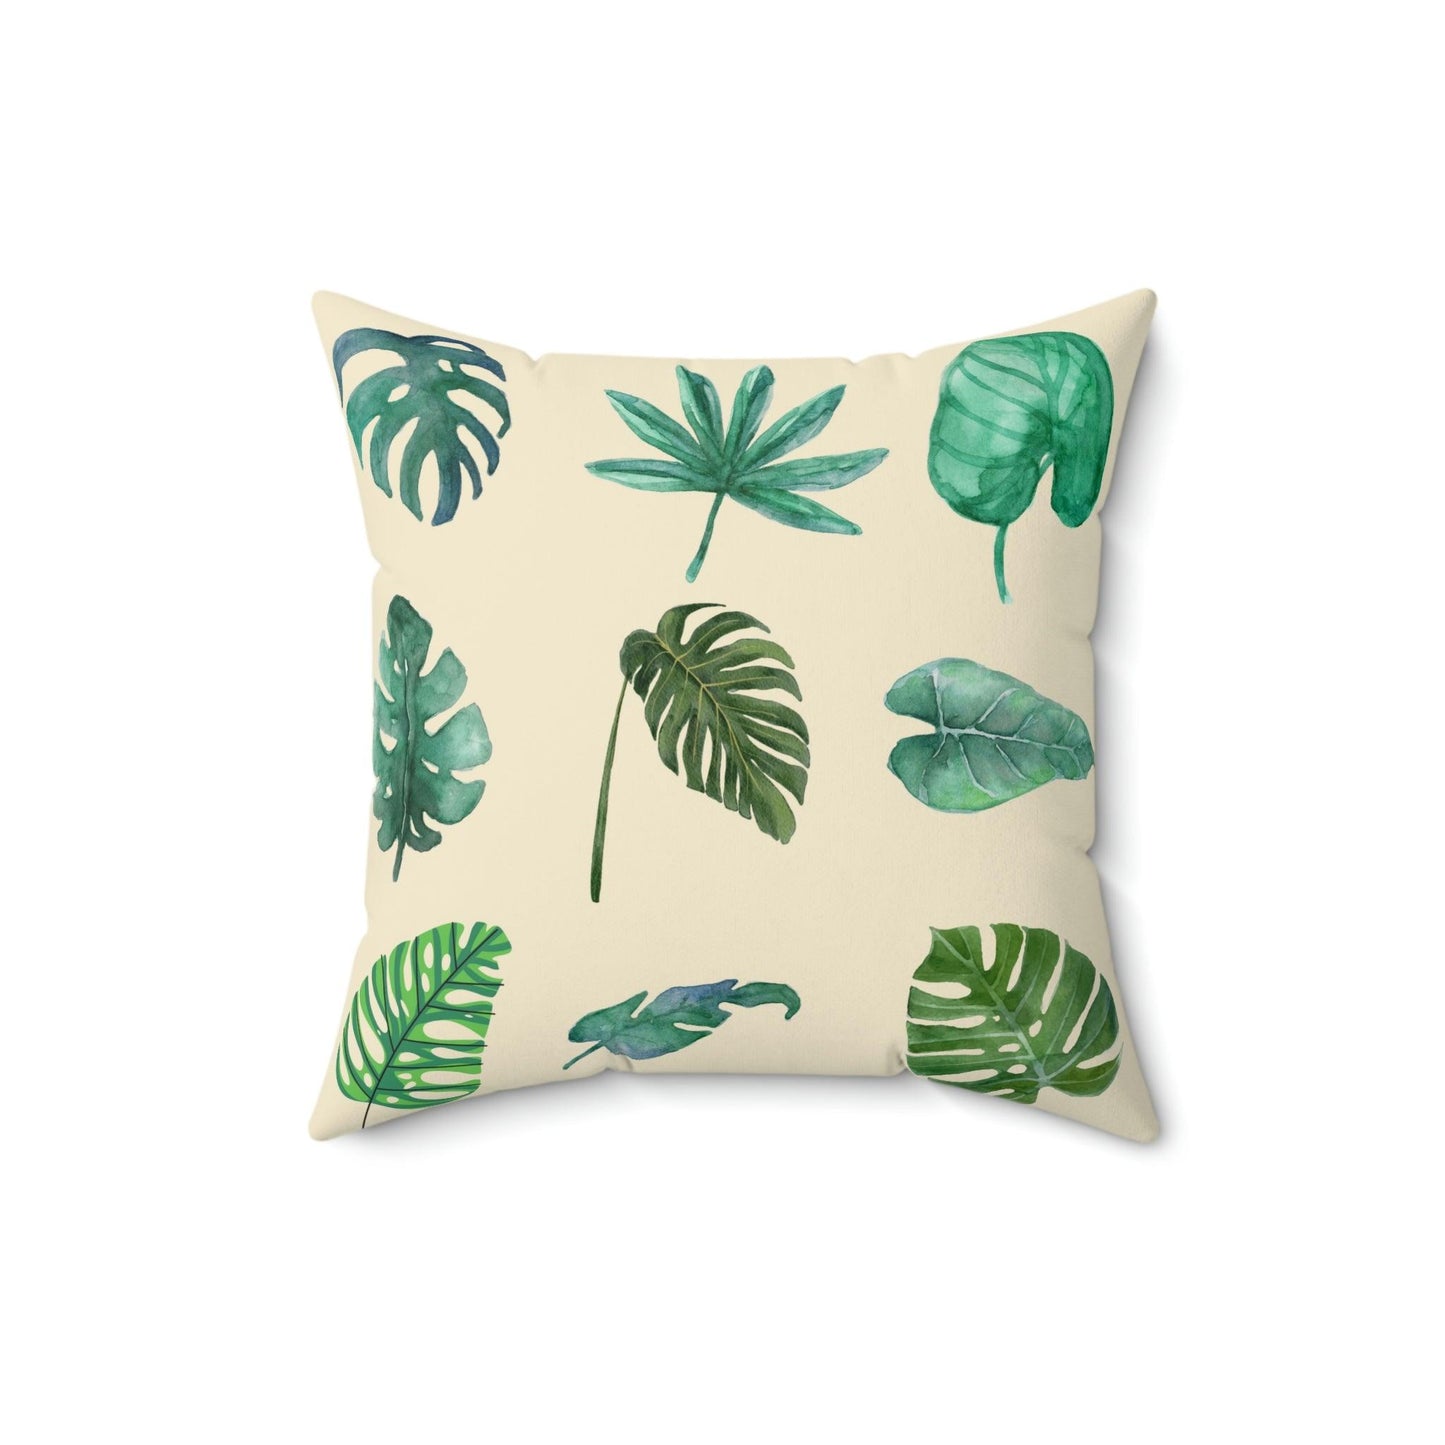 Green Monstera Leafy Printed Throw Pillow - MAIA HOMES